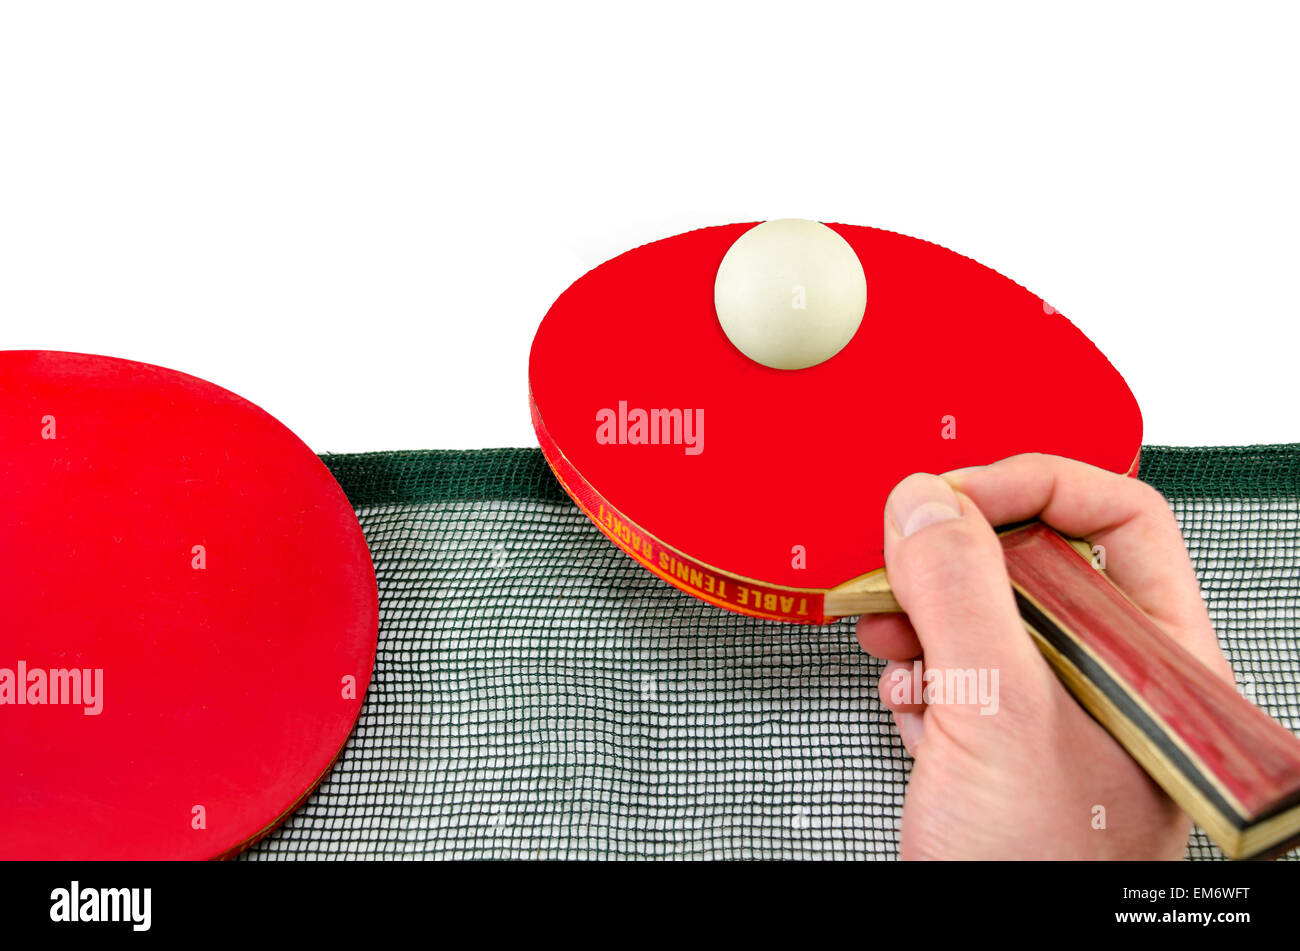 Male hand holding a ping pong racket and a table tennis ball above a net, isolated on white Stock Photo